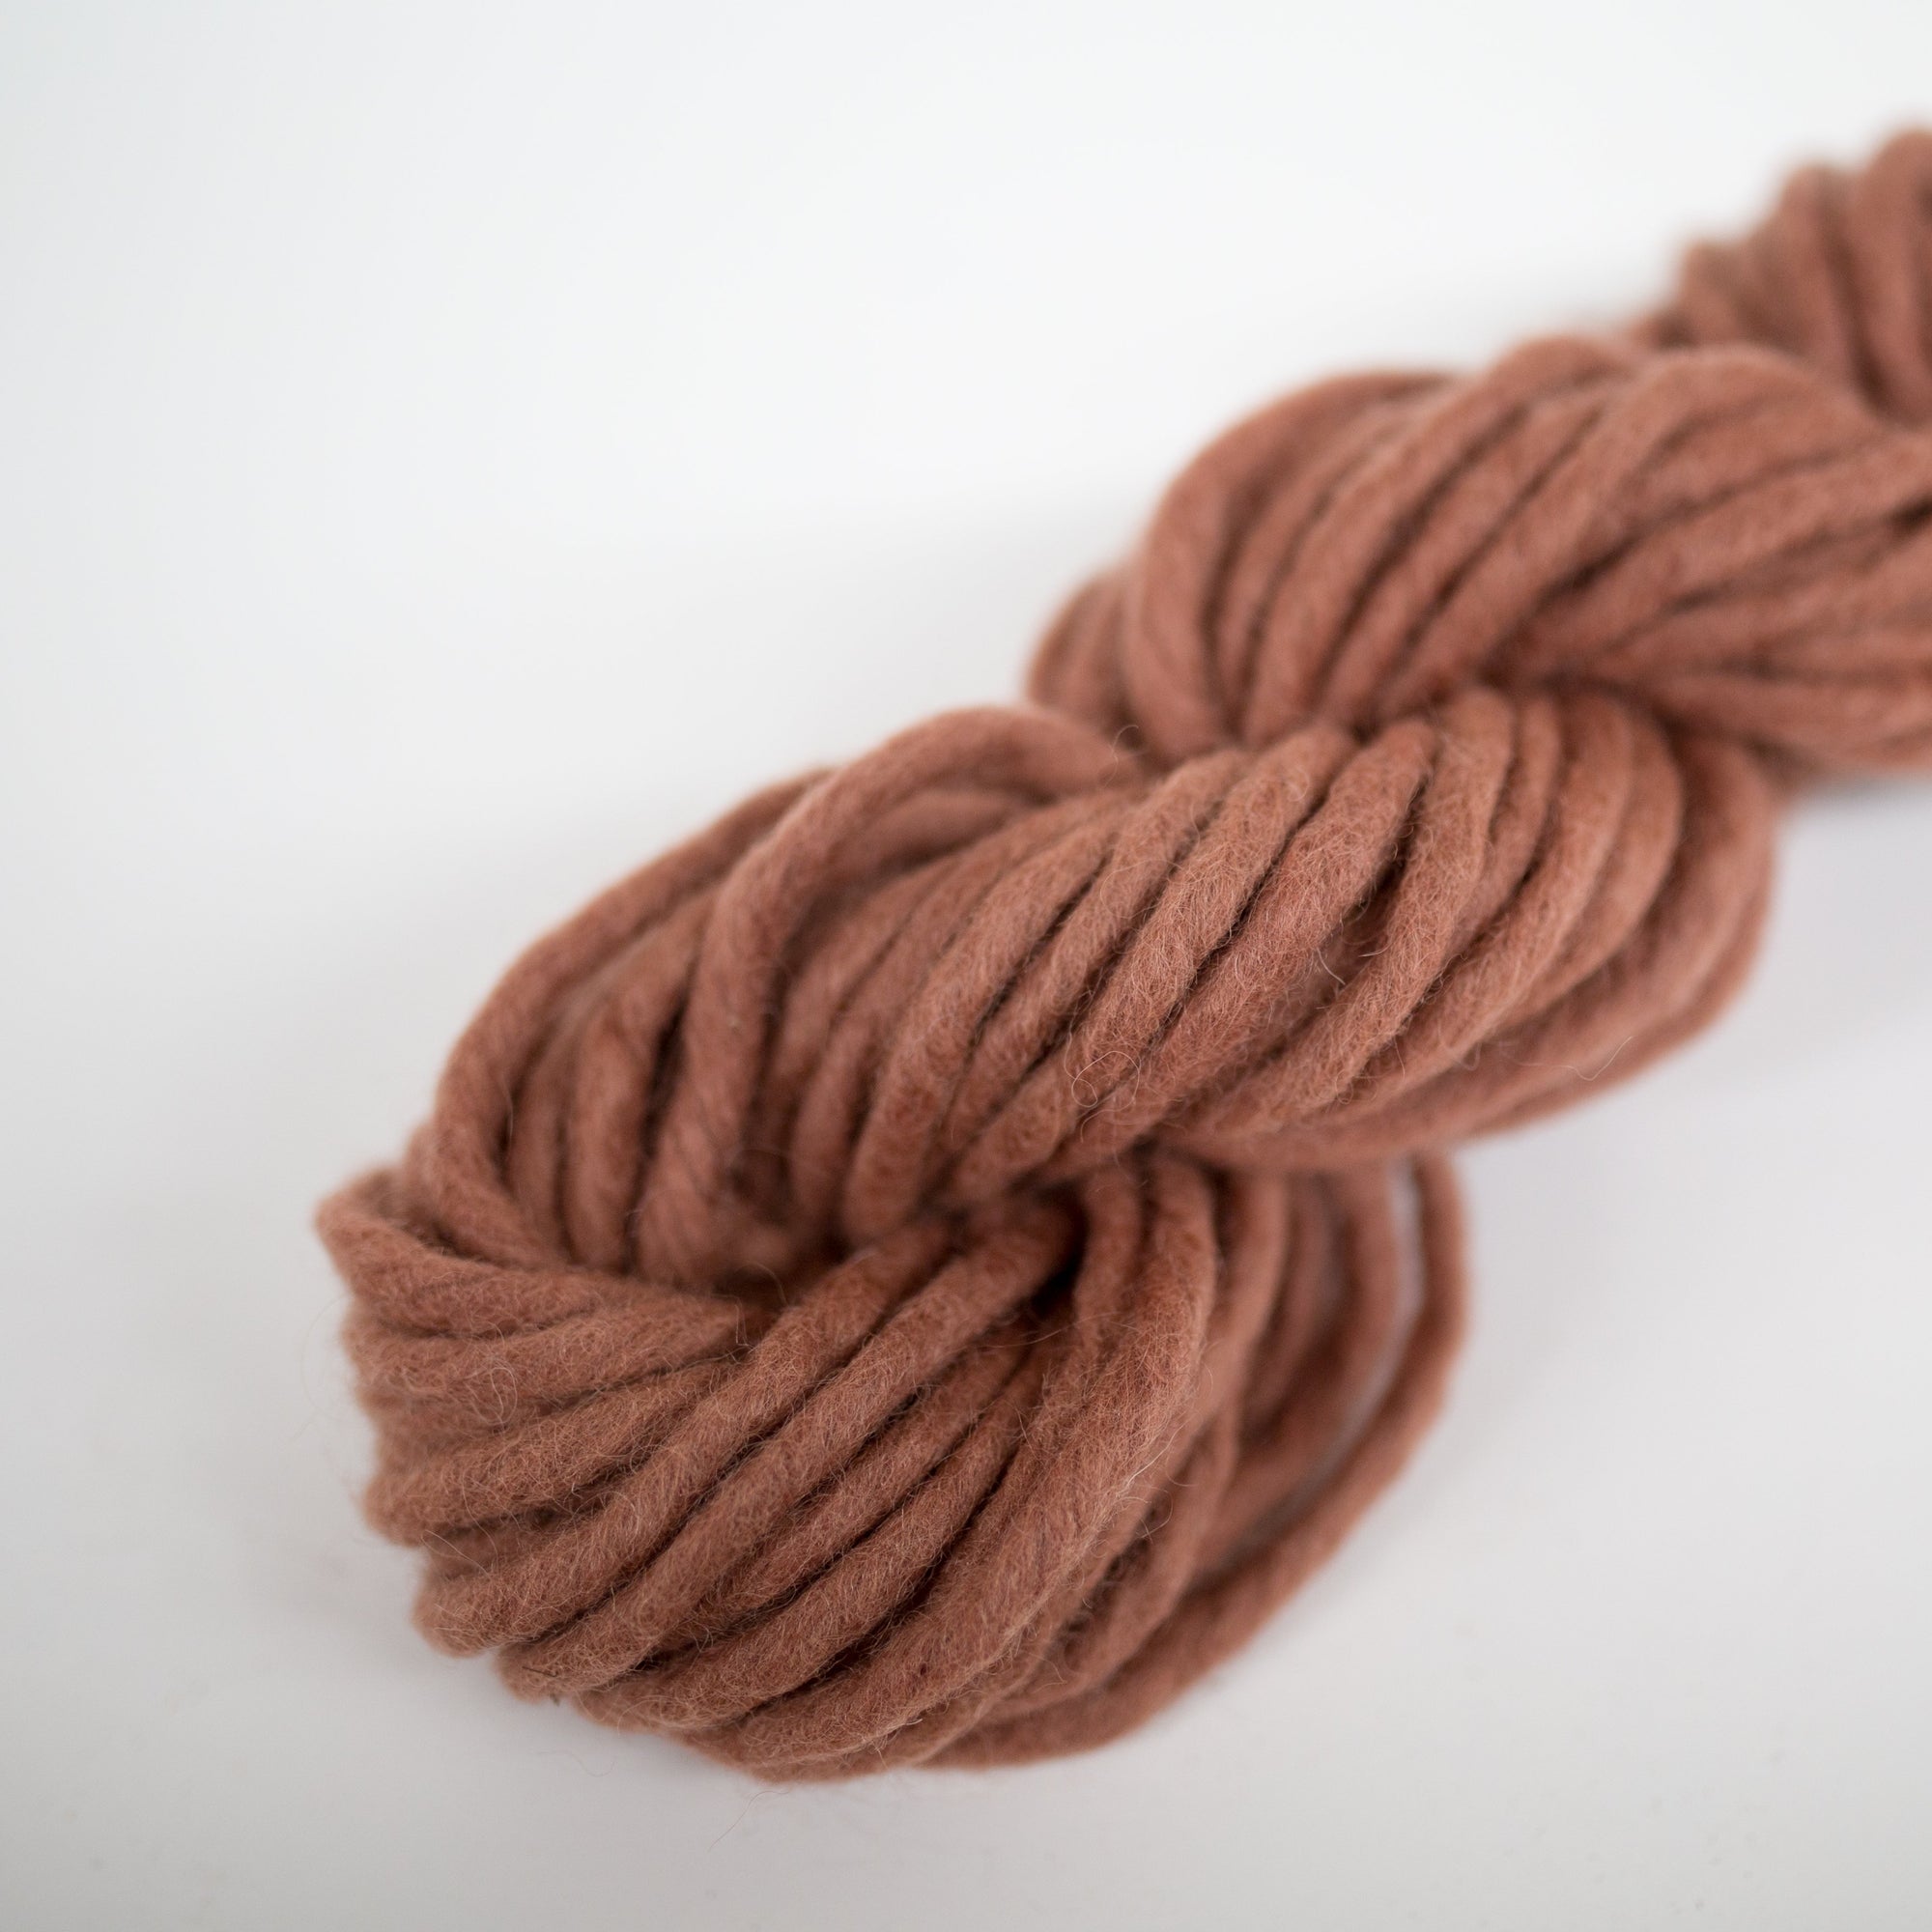 Mary Maker Studio speciality fibre Gingerbread Felted Finger Rope macrame cotton macrame rope macrame workshop macrame patterns macrame